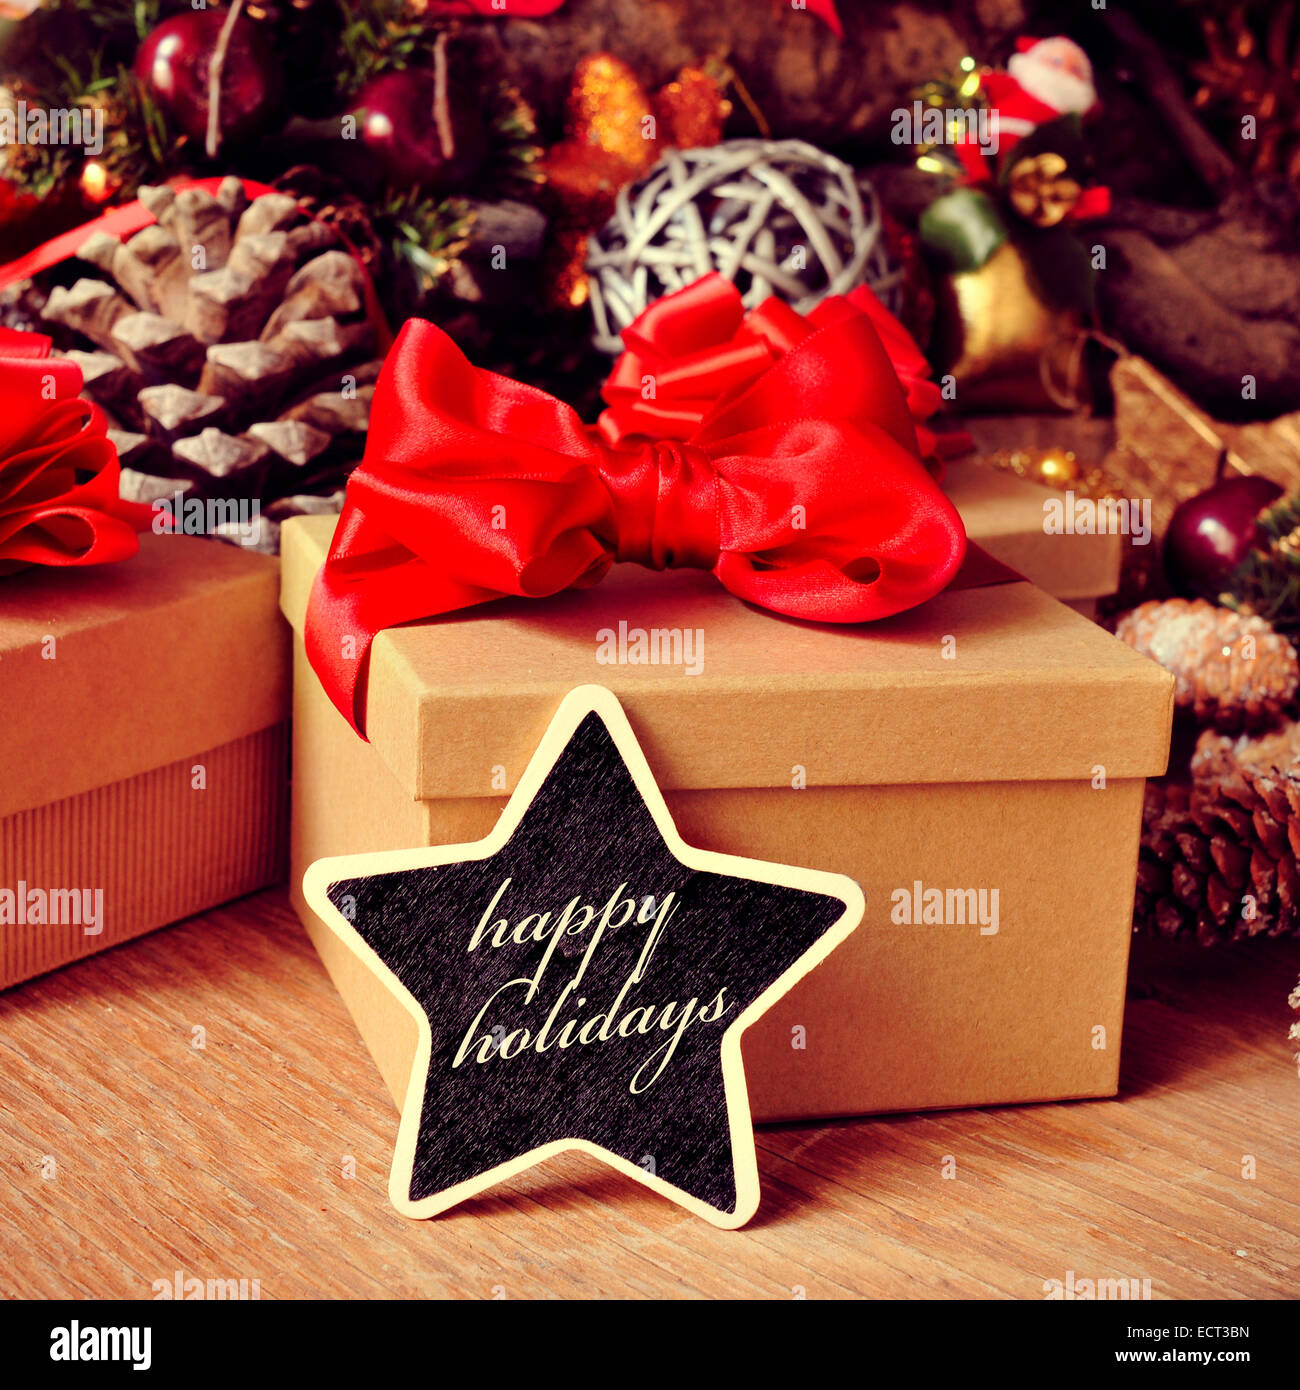 the text happy holidays written in a star-shaped chalkboard with some gifts and a pile of different christmas ornaments, such as Stock Photo